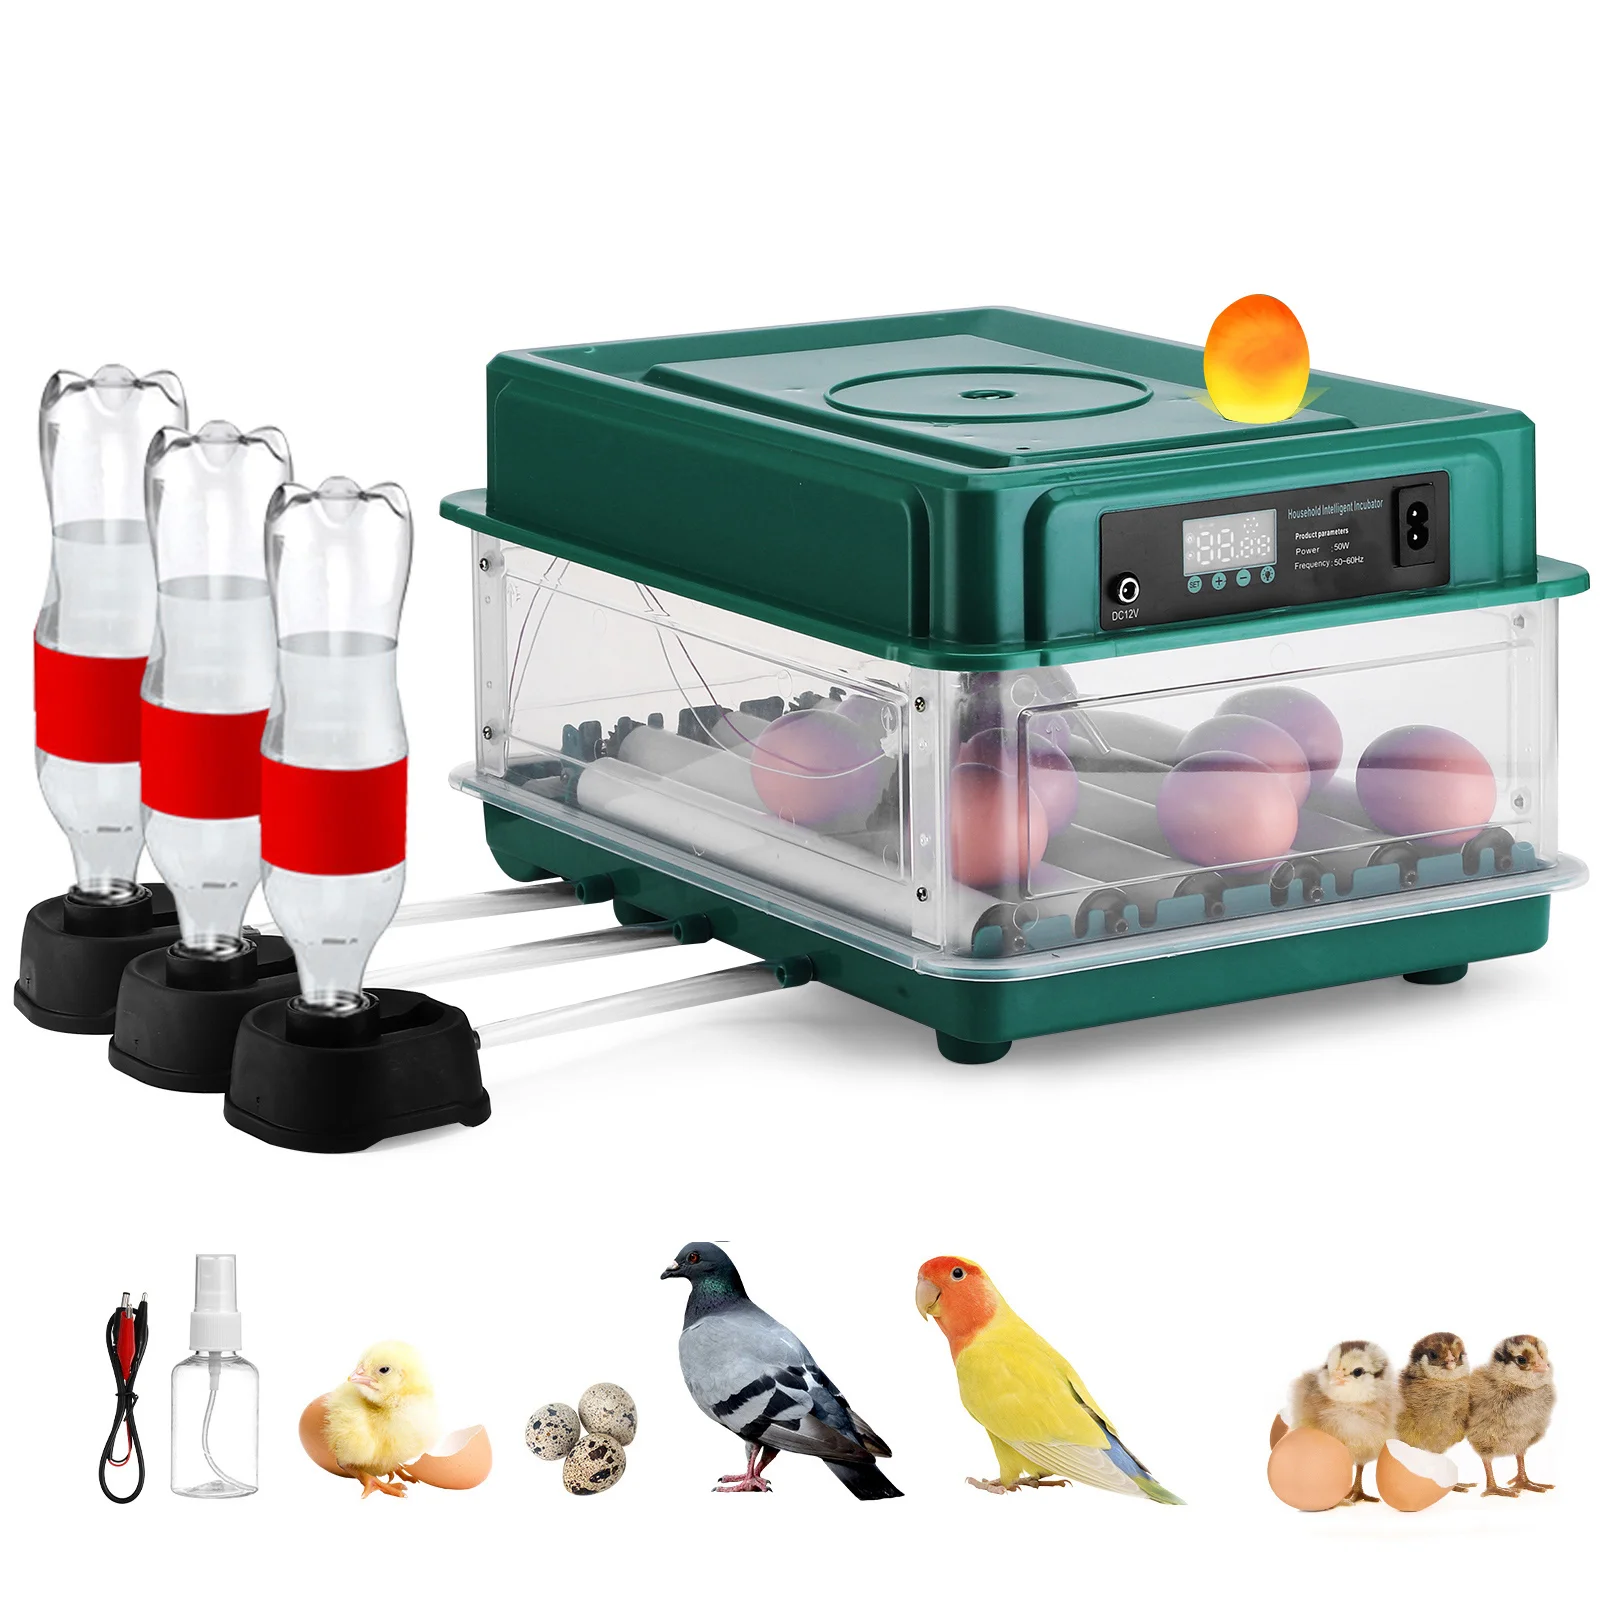 

Fully Automatic Double Electric Incubator British Standard Egg Incubators For Chickens Controller Eggs Hatching